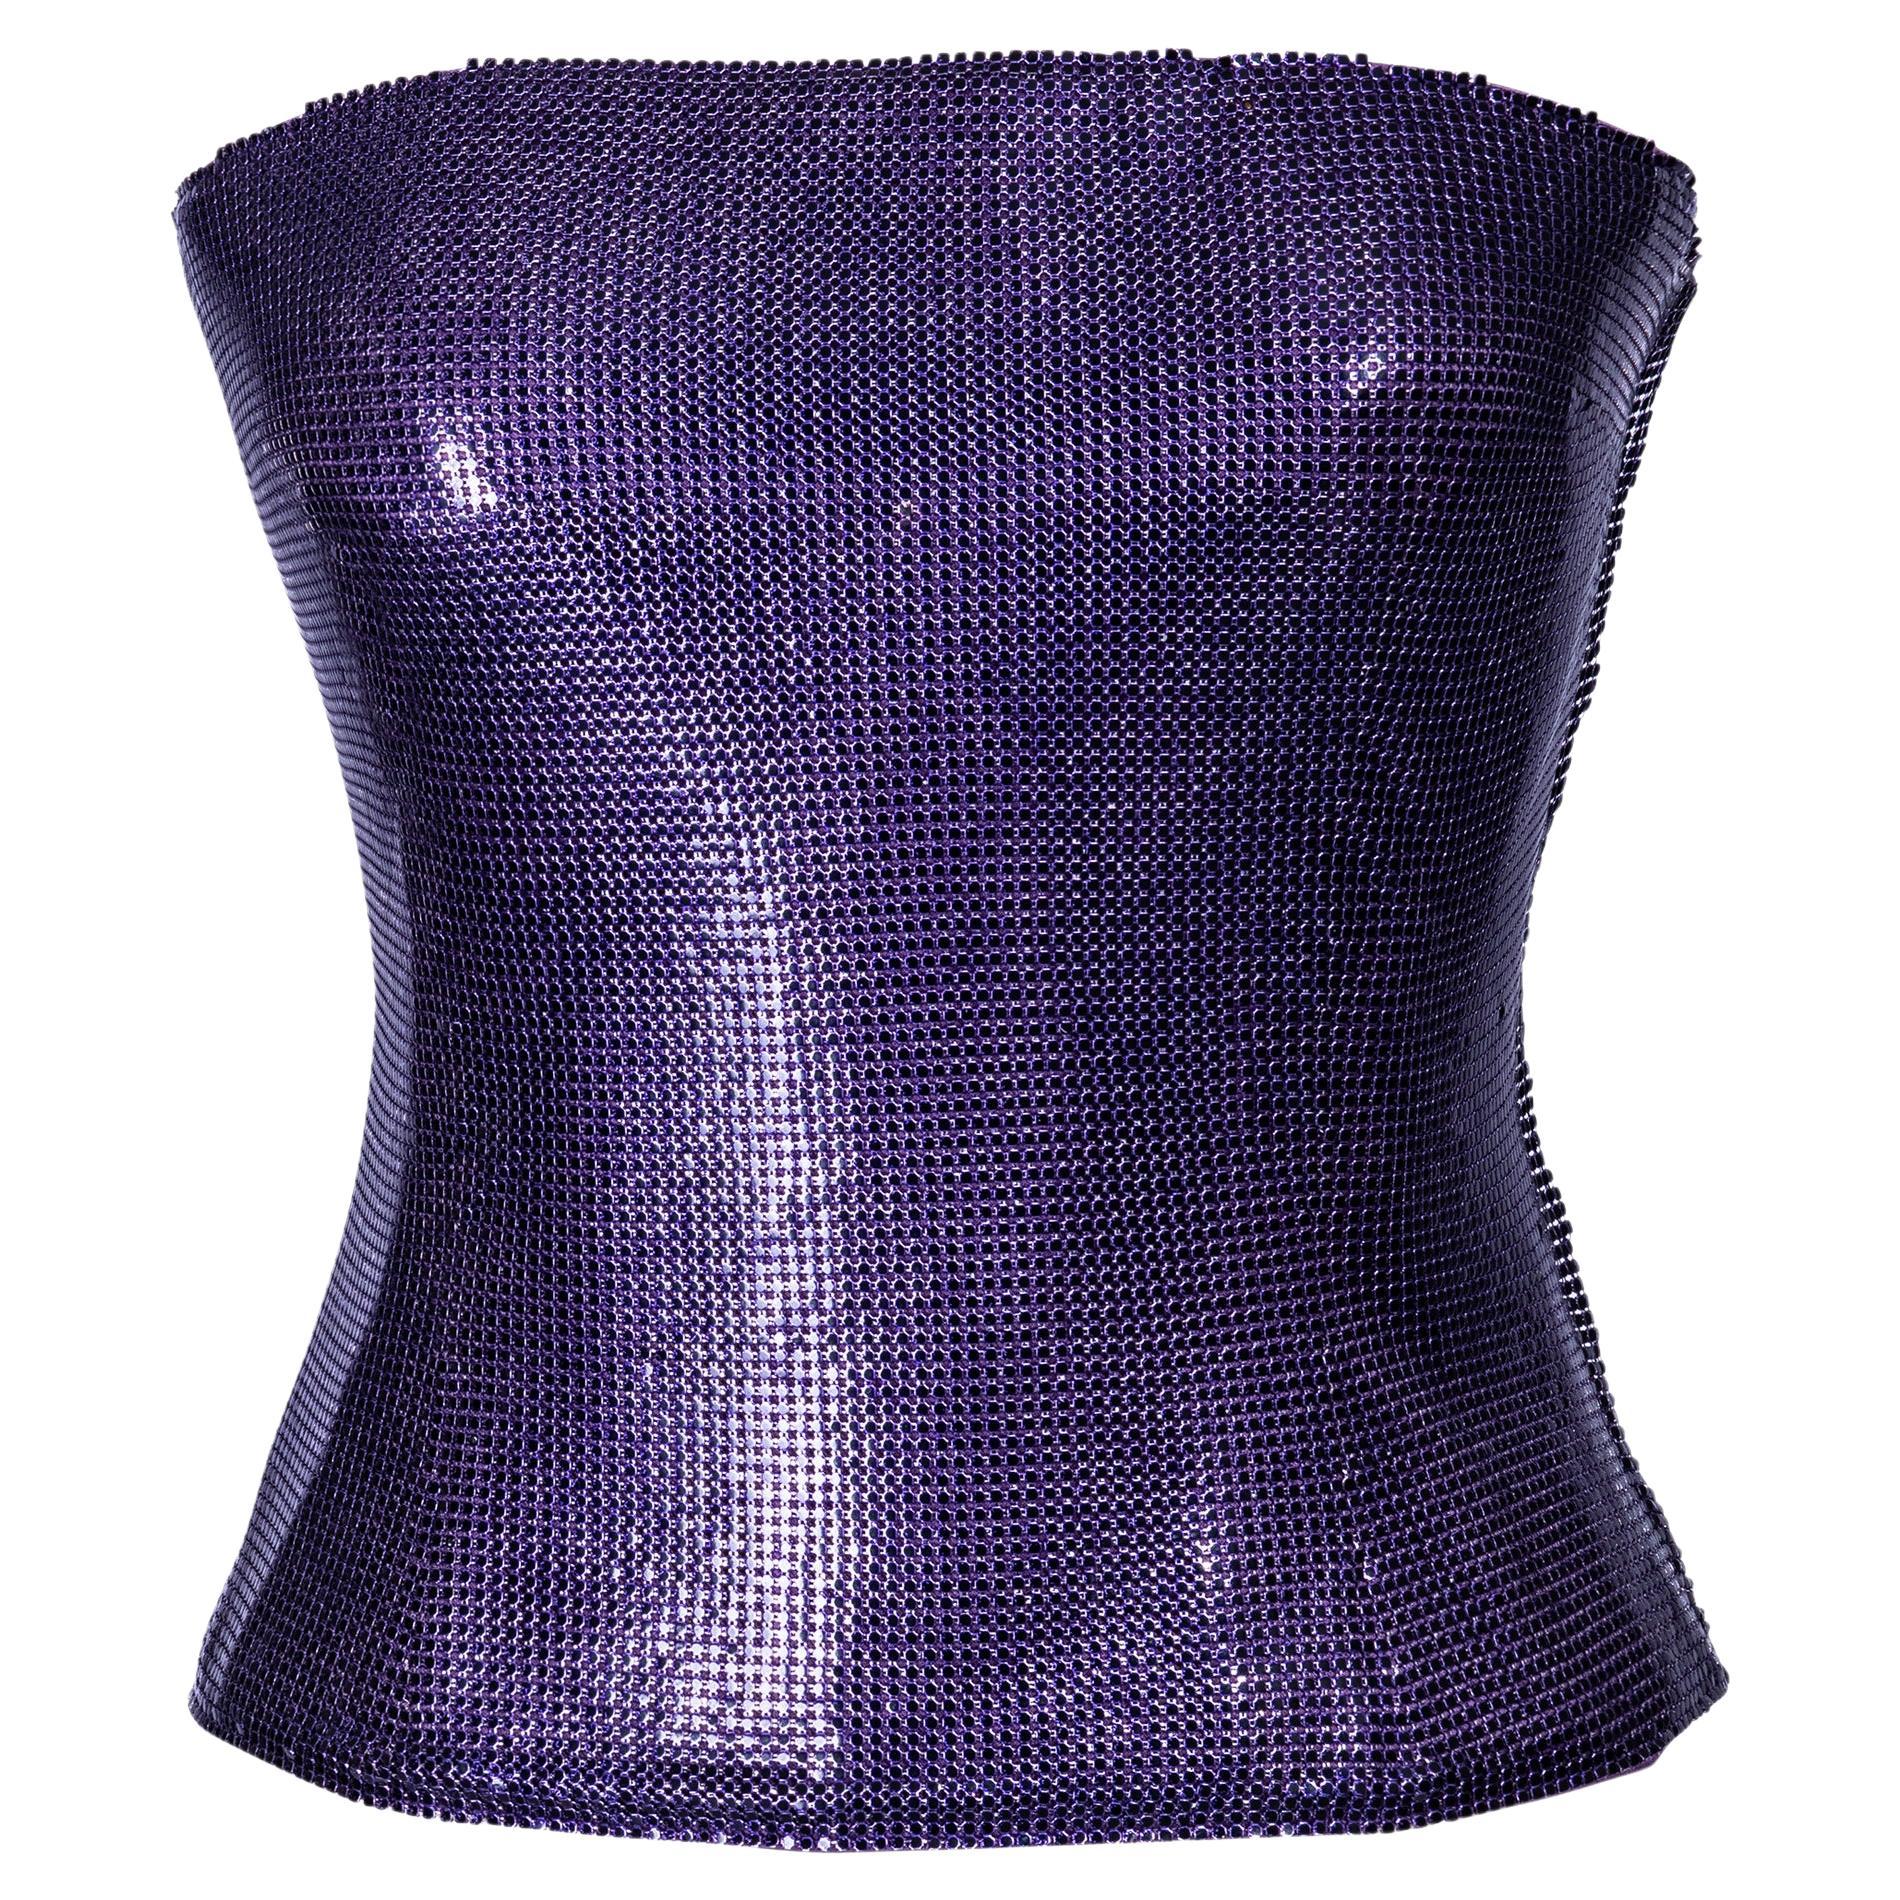 S/S 1998 Atelier Versace Haute Couture Purple Strapless Oroton Chainmail Top